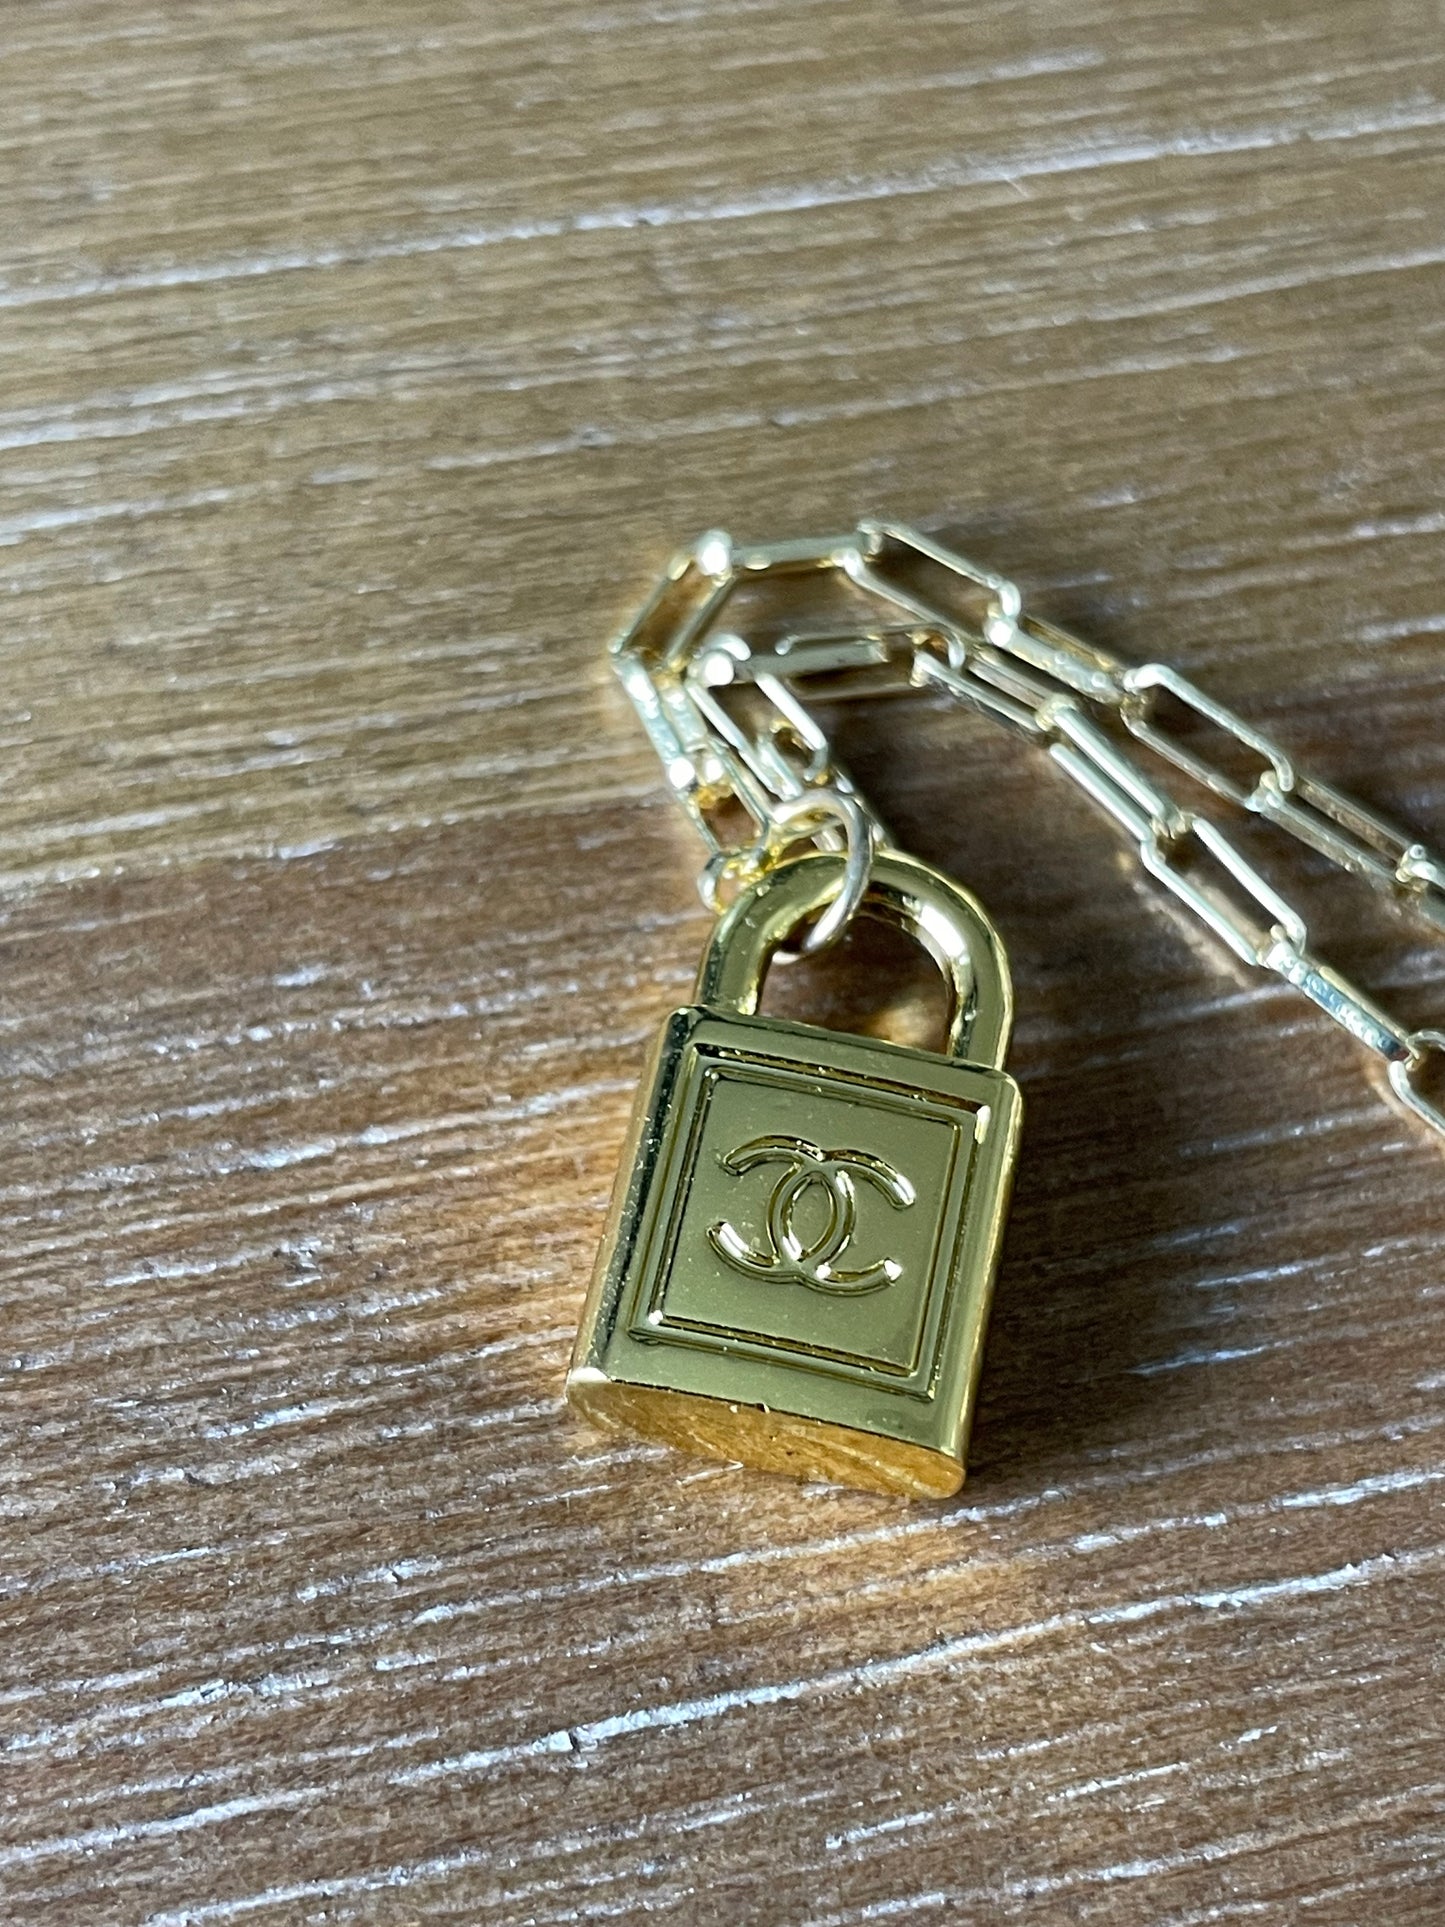 Yellow Gold Lock Necklace